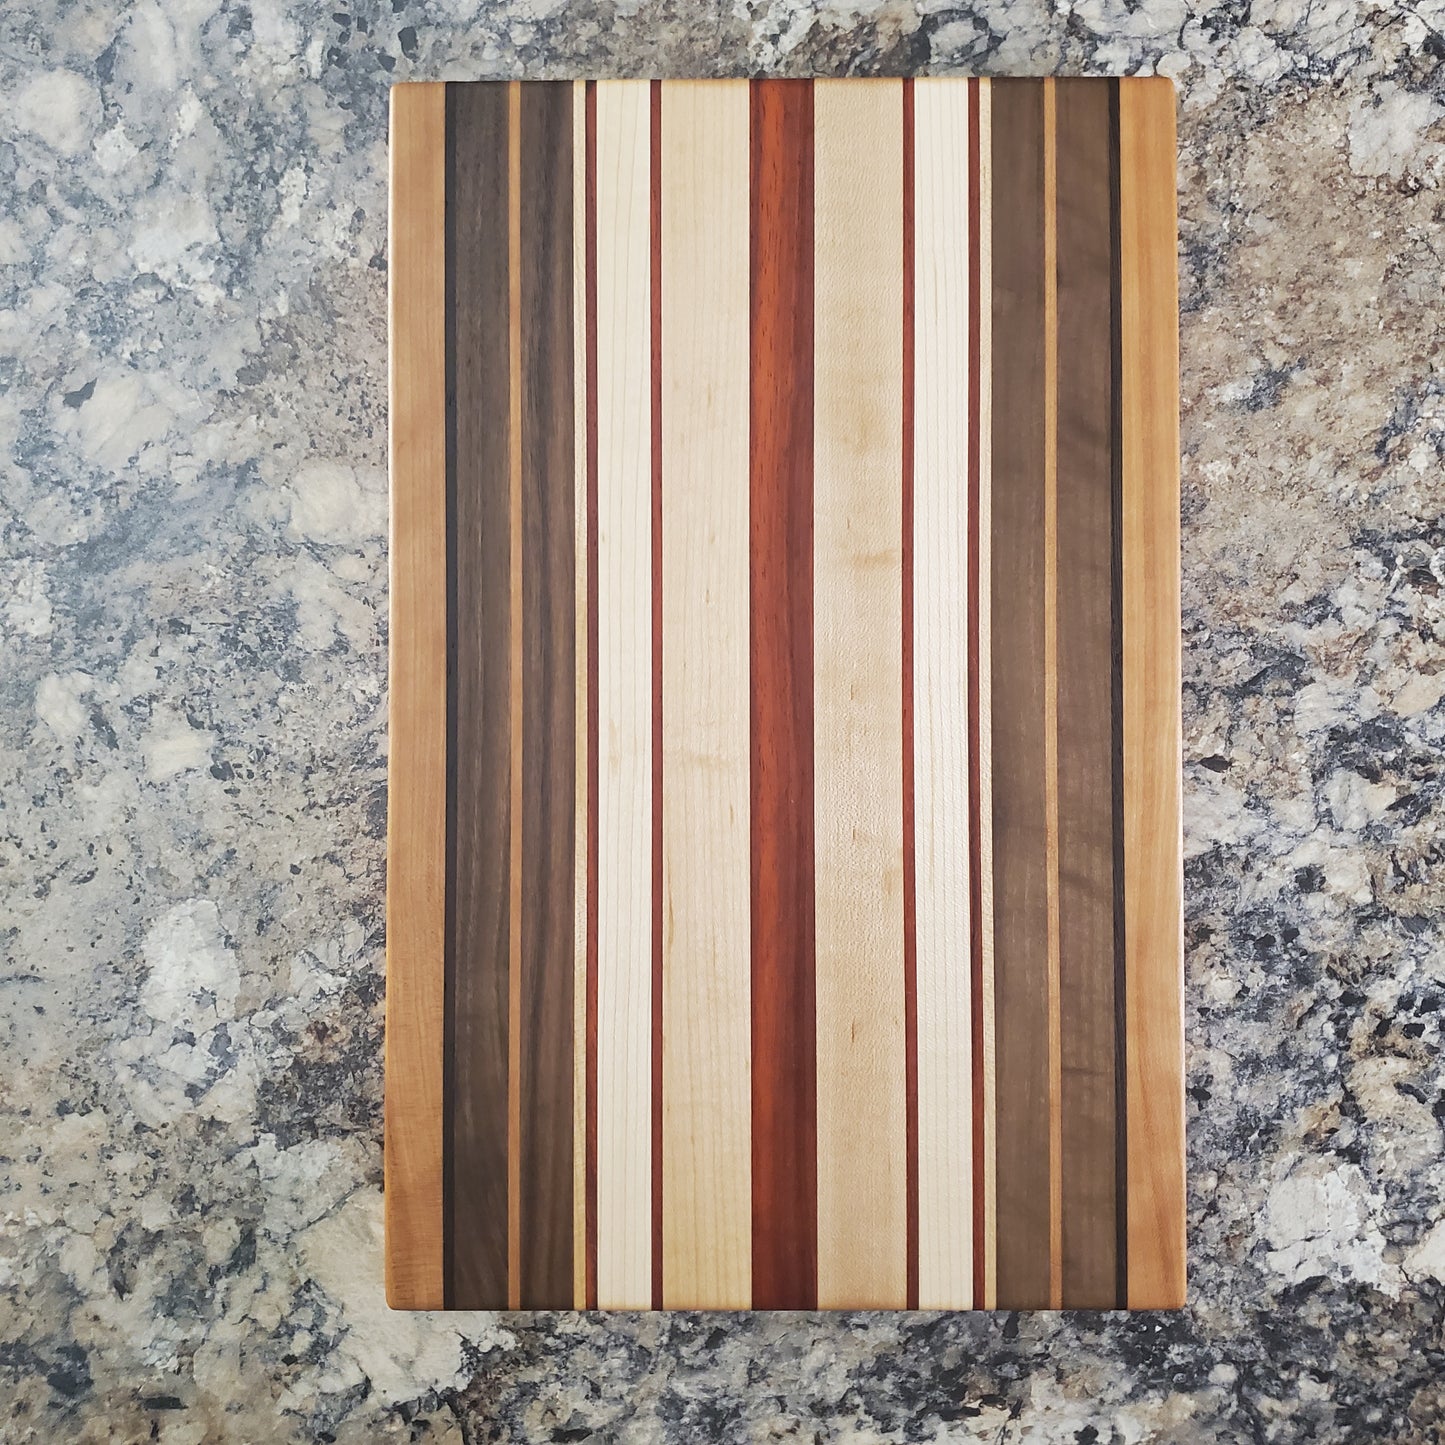 Signature Series Pumpkin Spice cutting board made from maple, walnut, cherry, padauk, and wenge by Lone Wolf Wood Designs